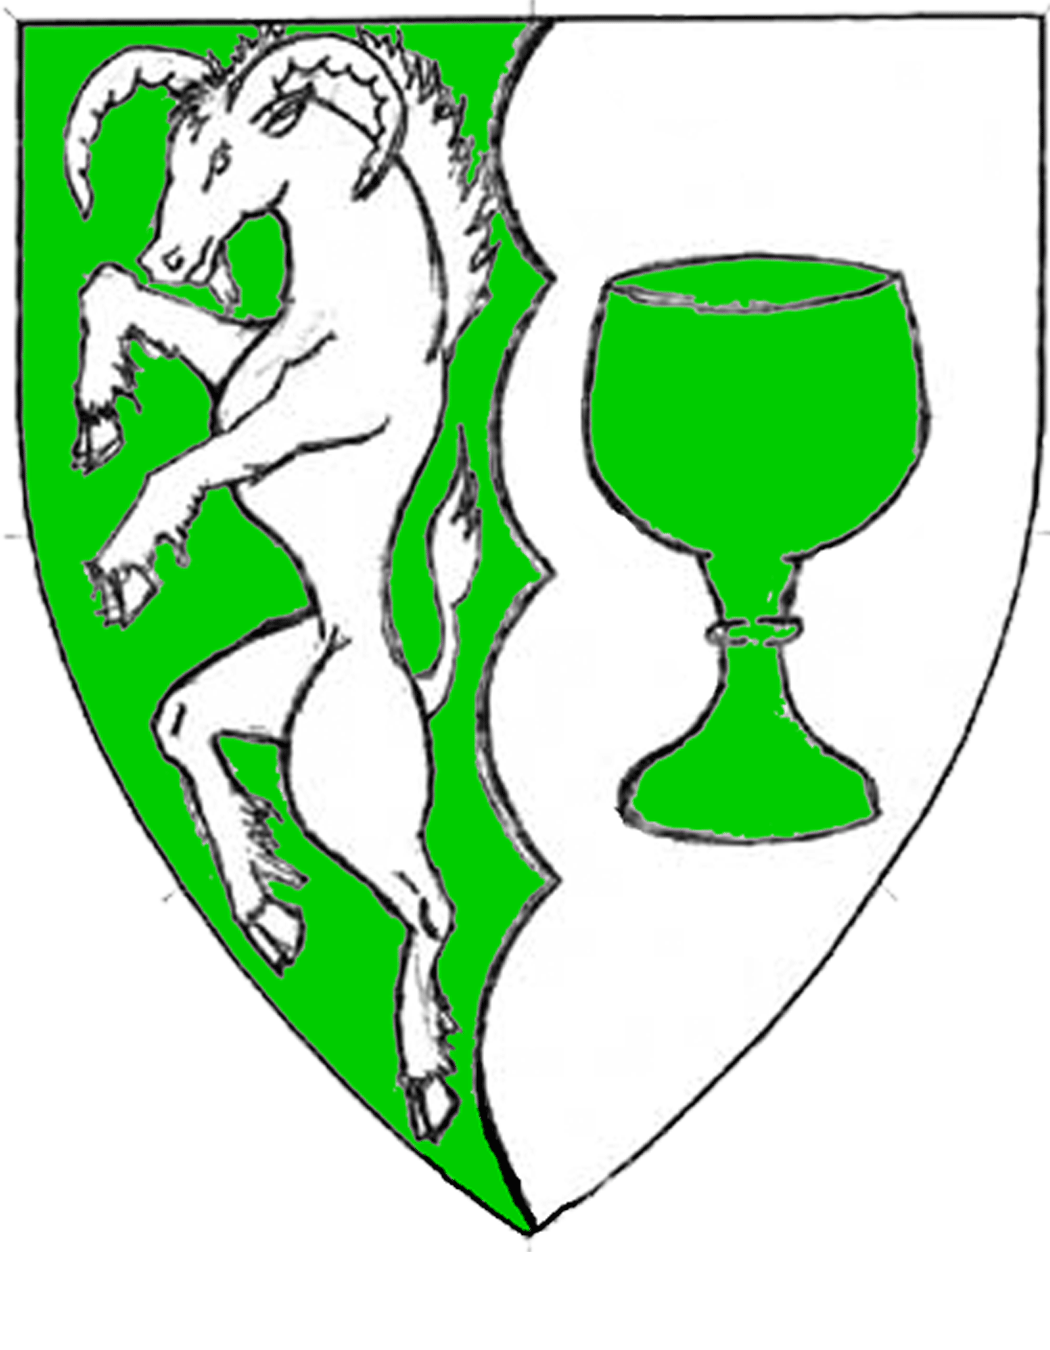 The arms of Eric Hawkwood